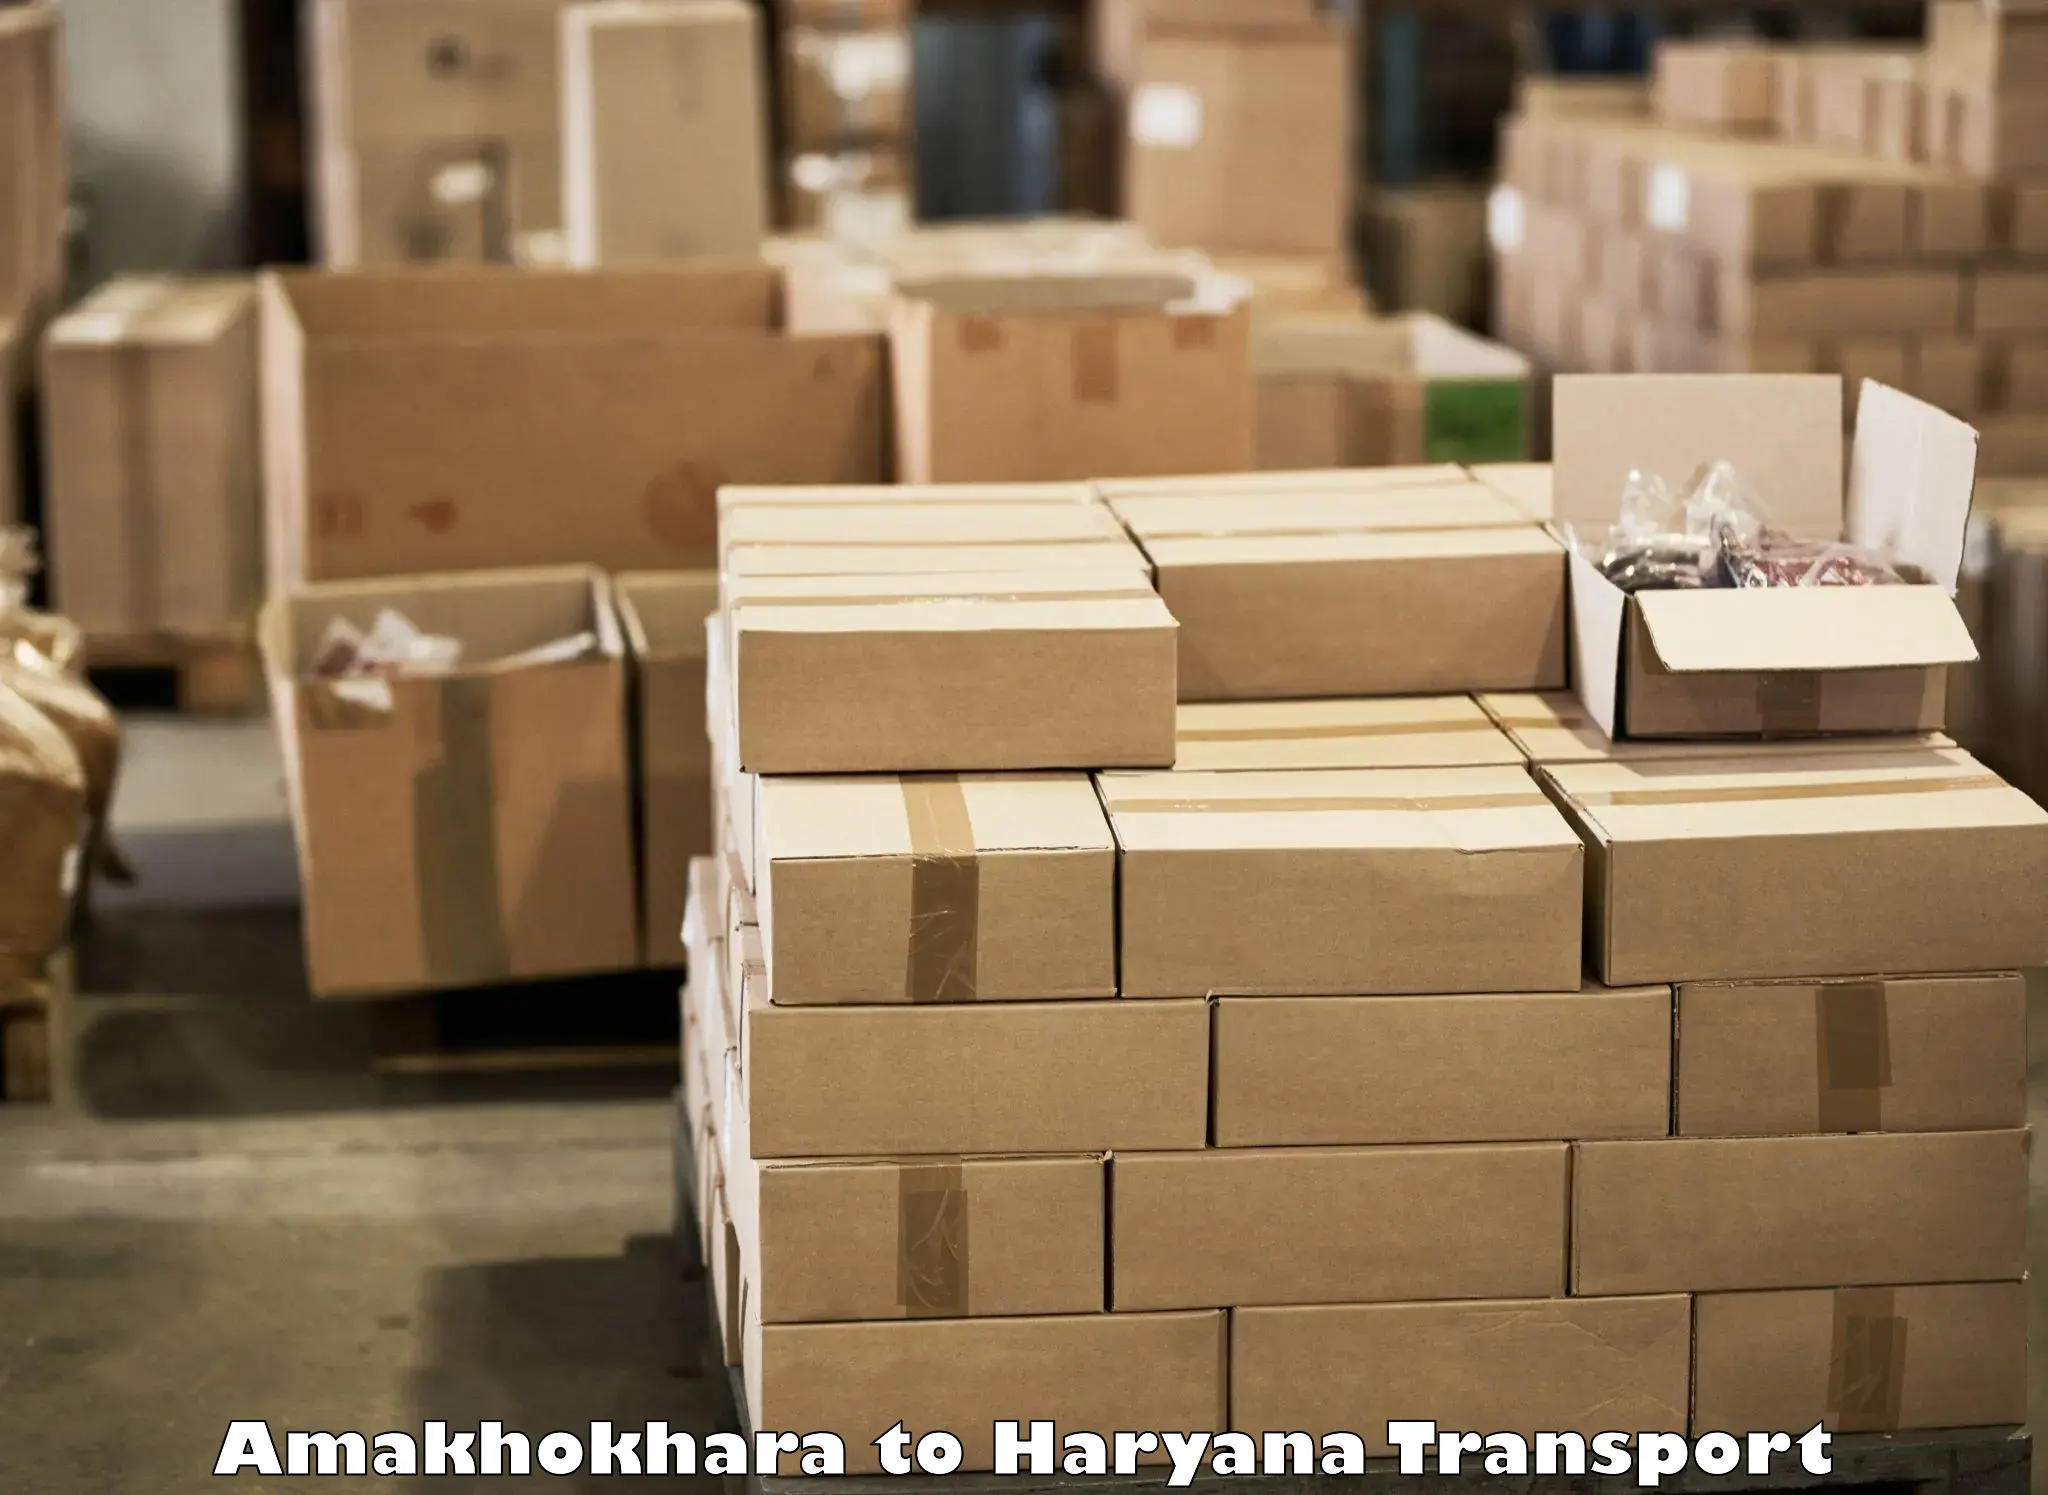 Two wheeler parcel service in Amakhokhara to Gurgaon